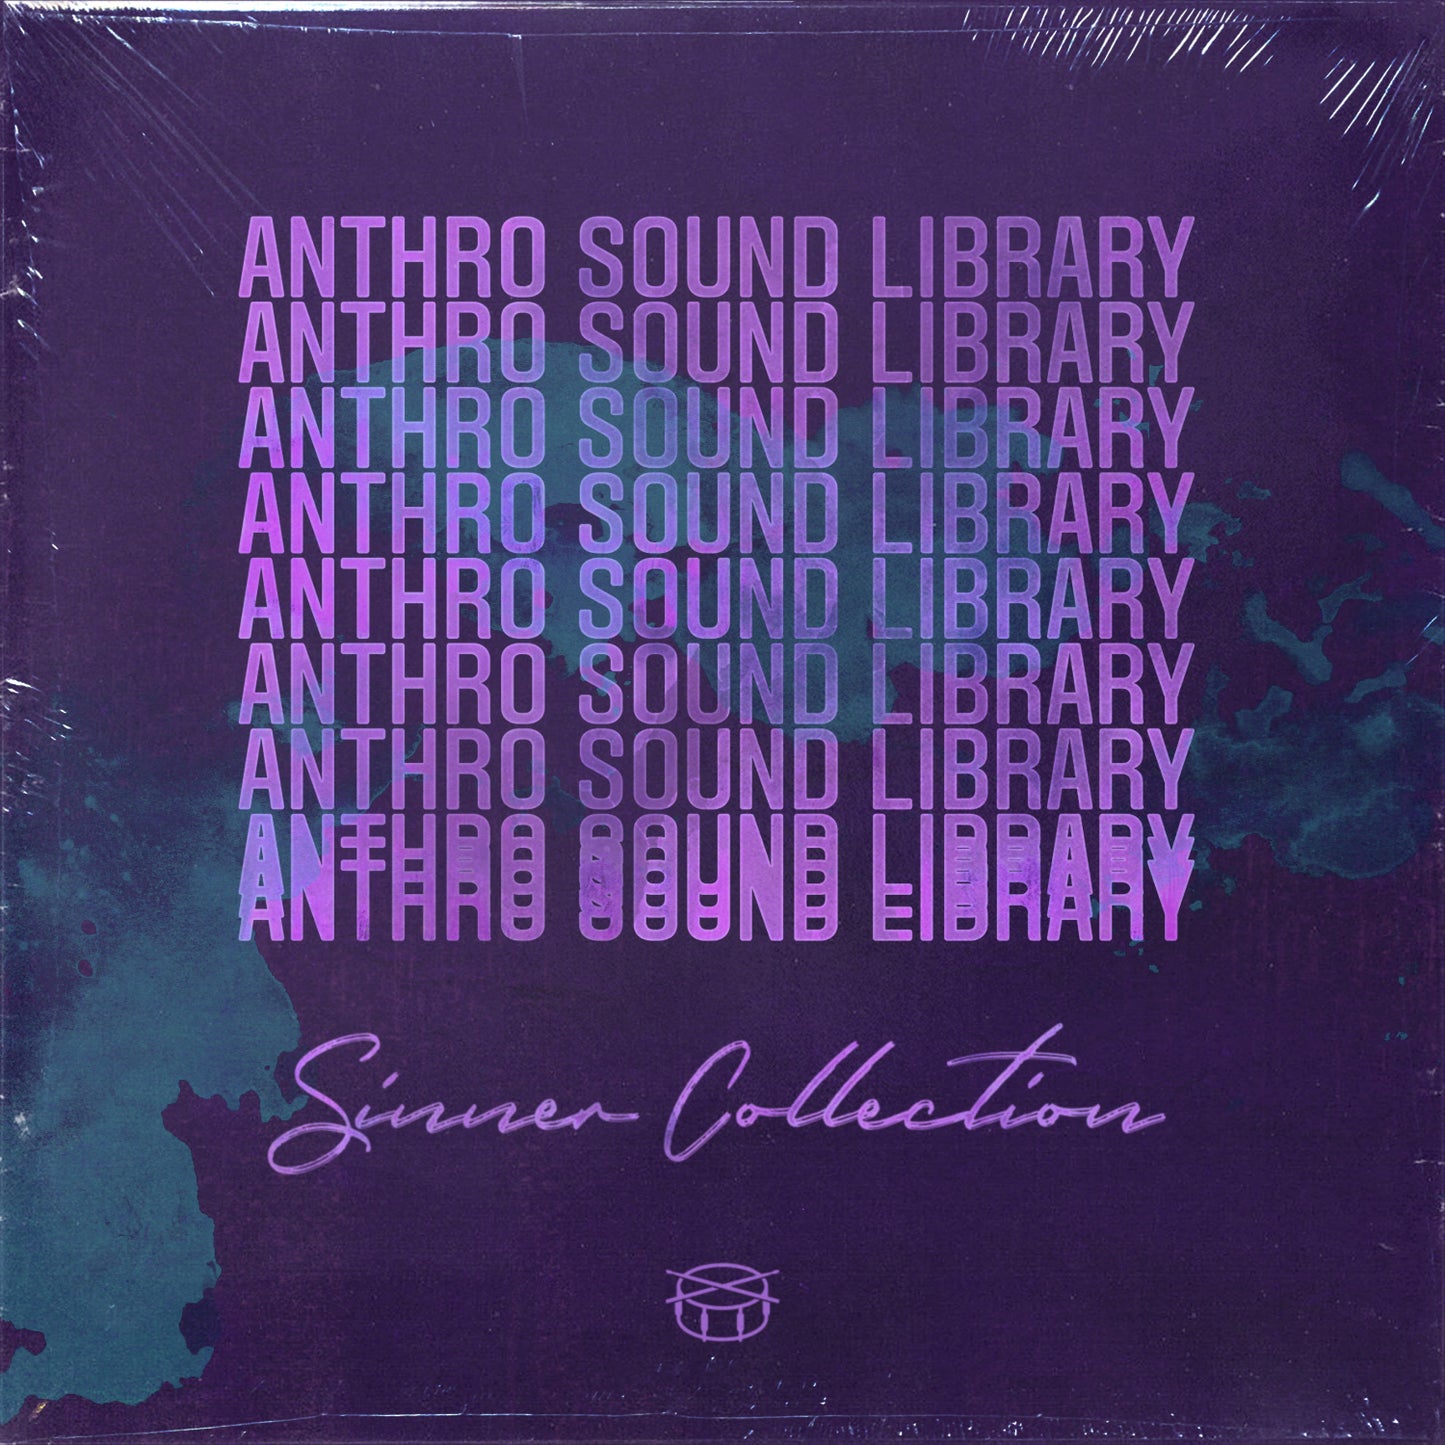 ANTHRO SOUND LIBRARY: SINNER COLLECTION [COMPLETE]